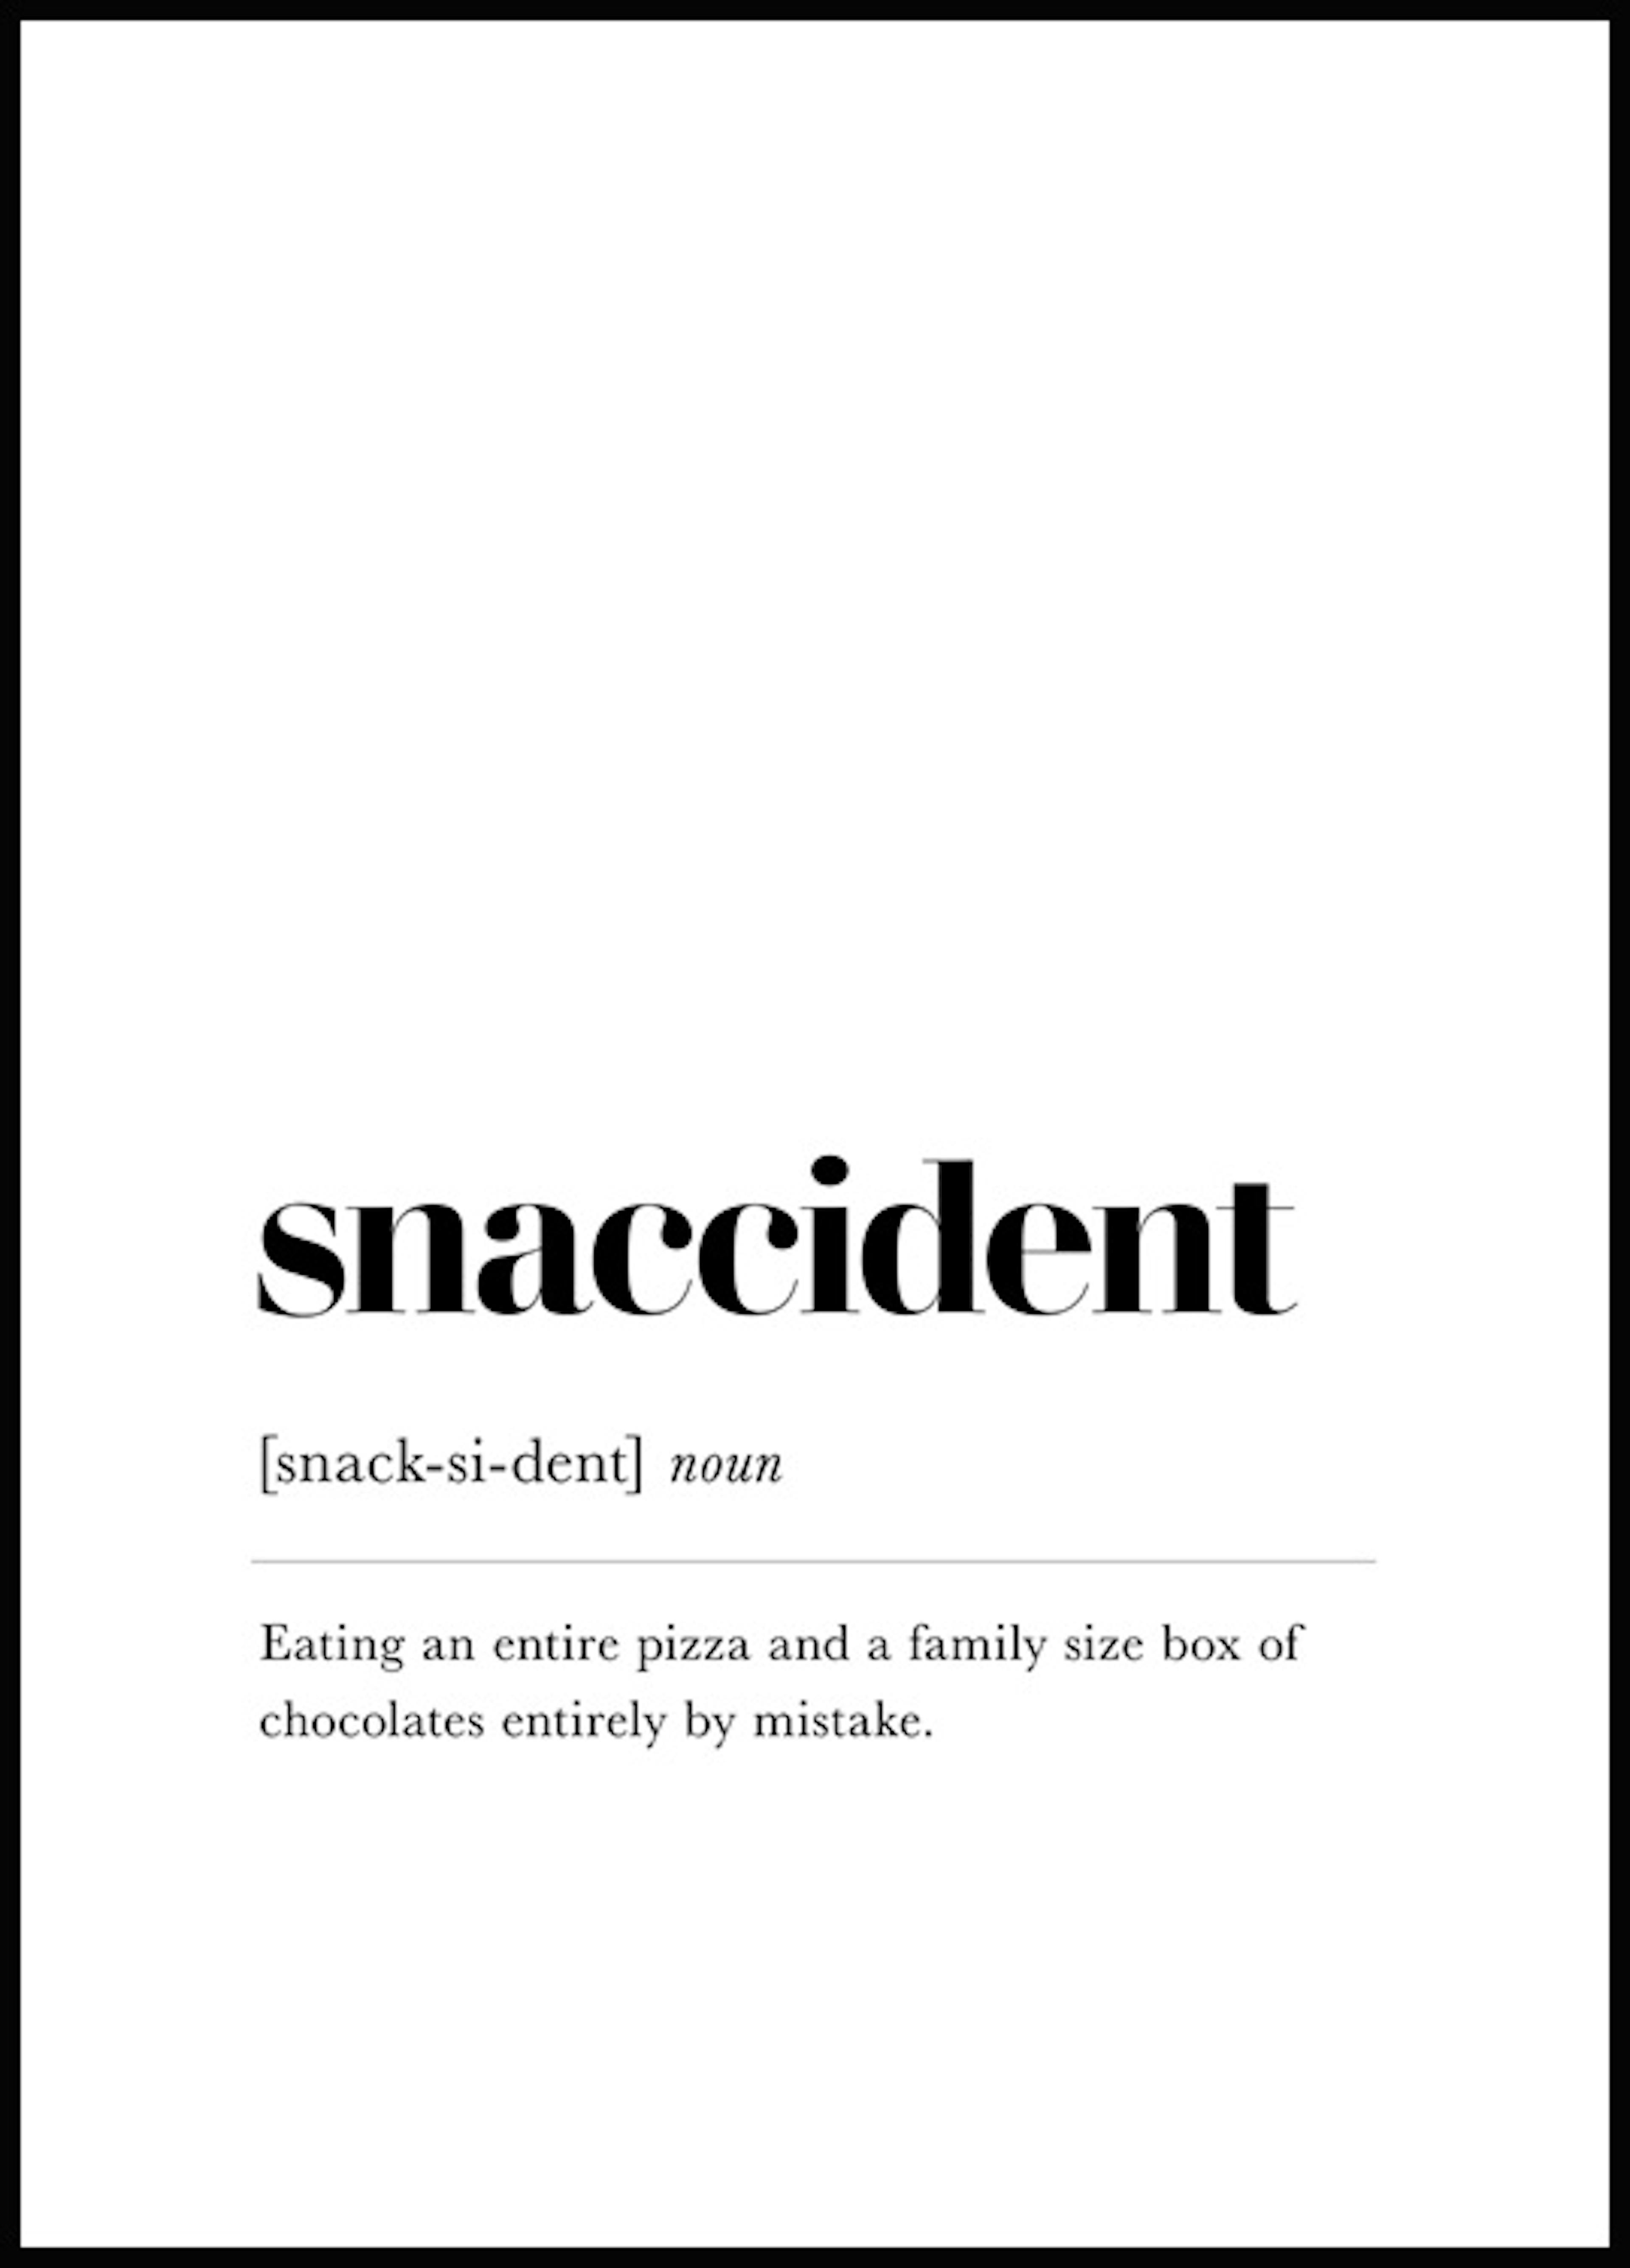 Poster Snaccident 0